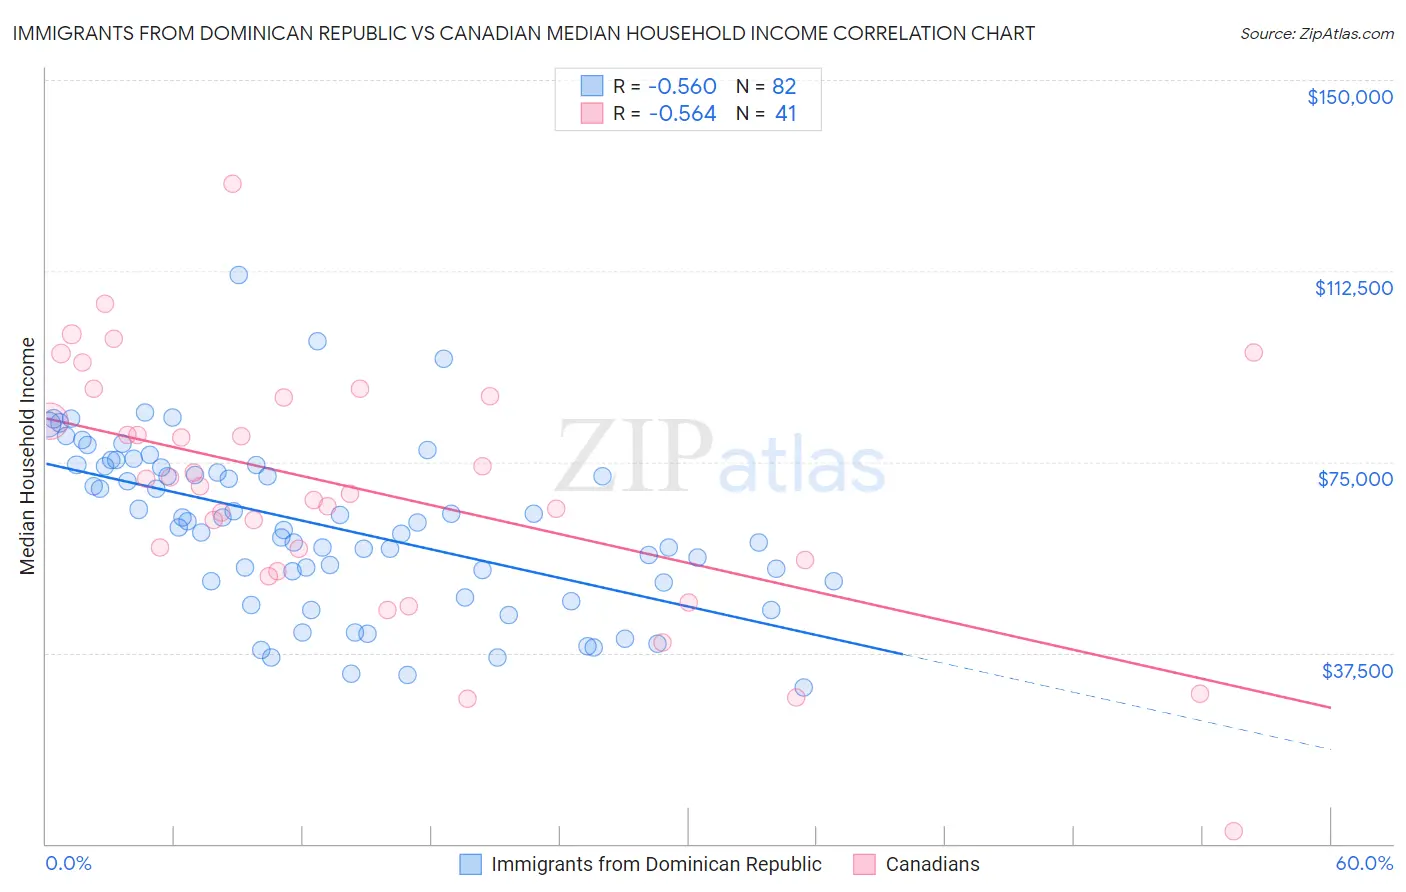 Immigrants from Dominican Republic vs Canadian Median Household Income